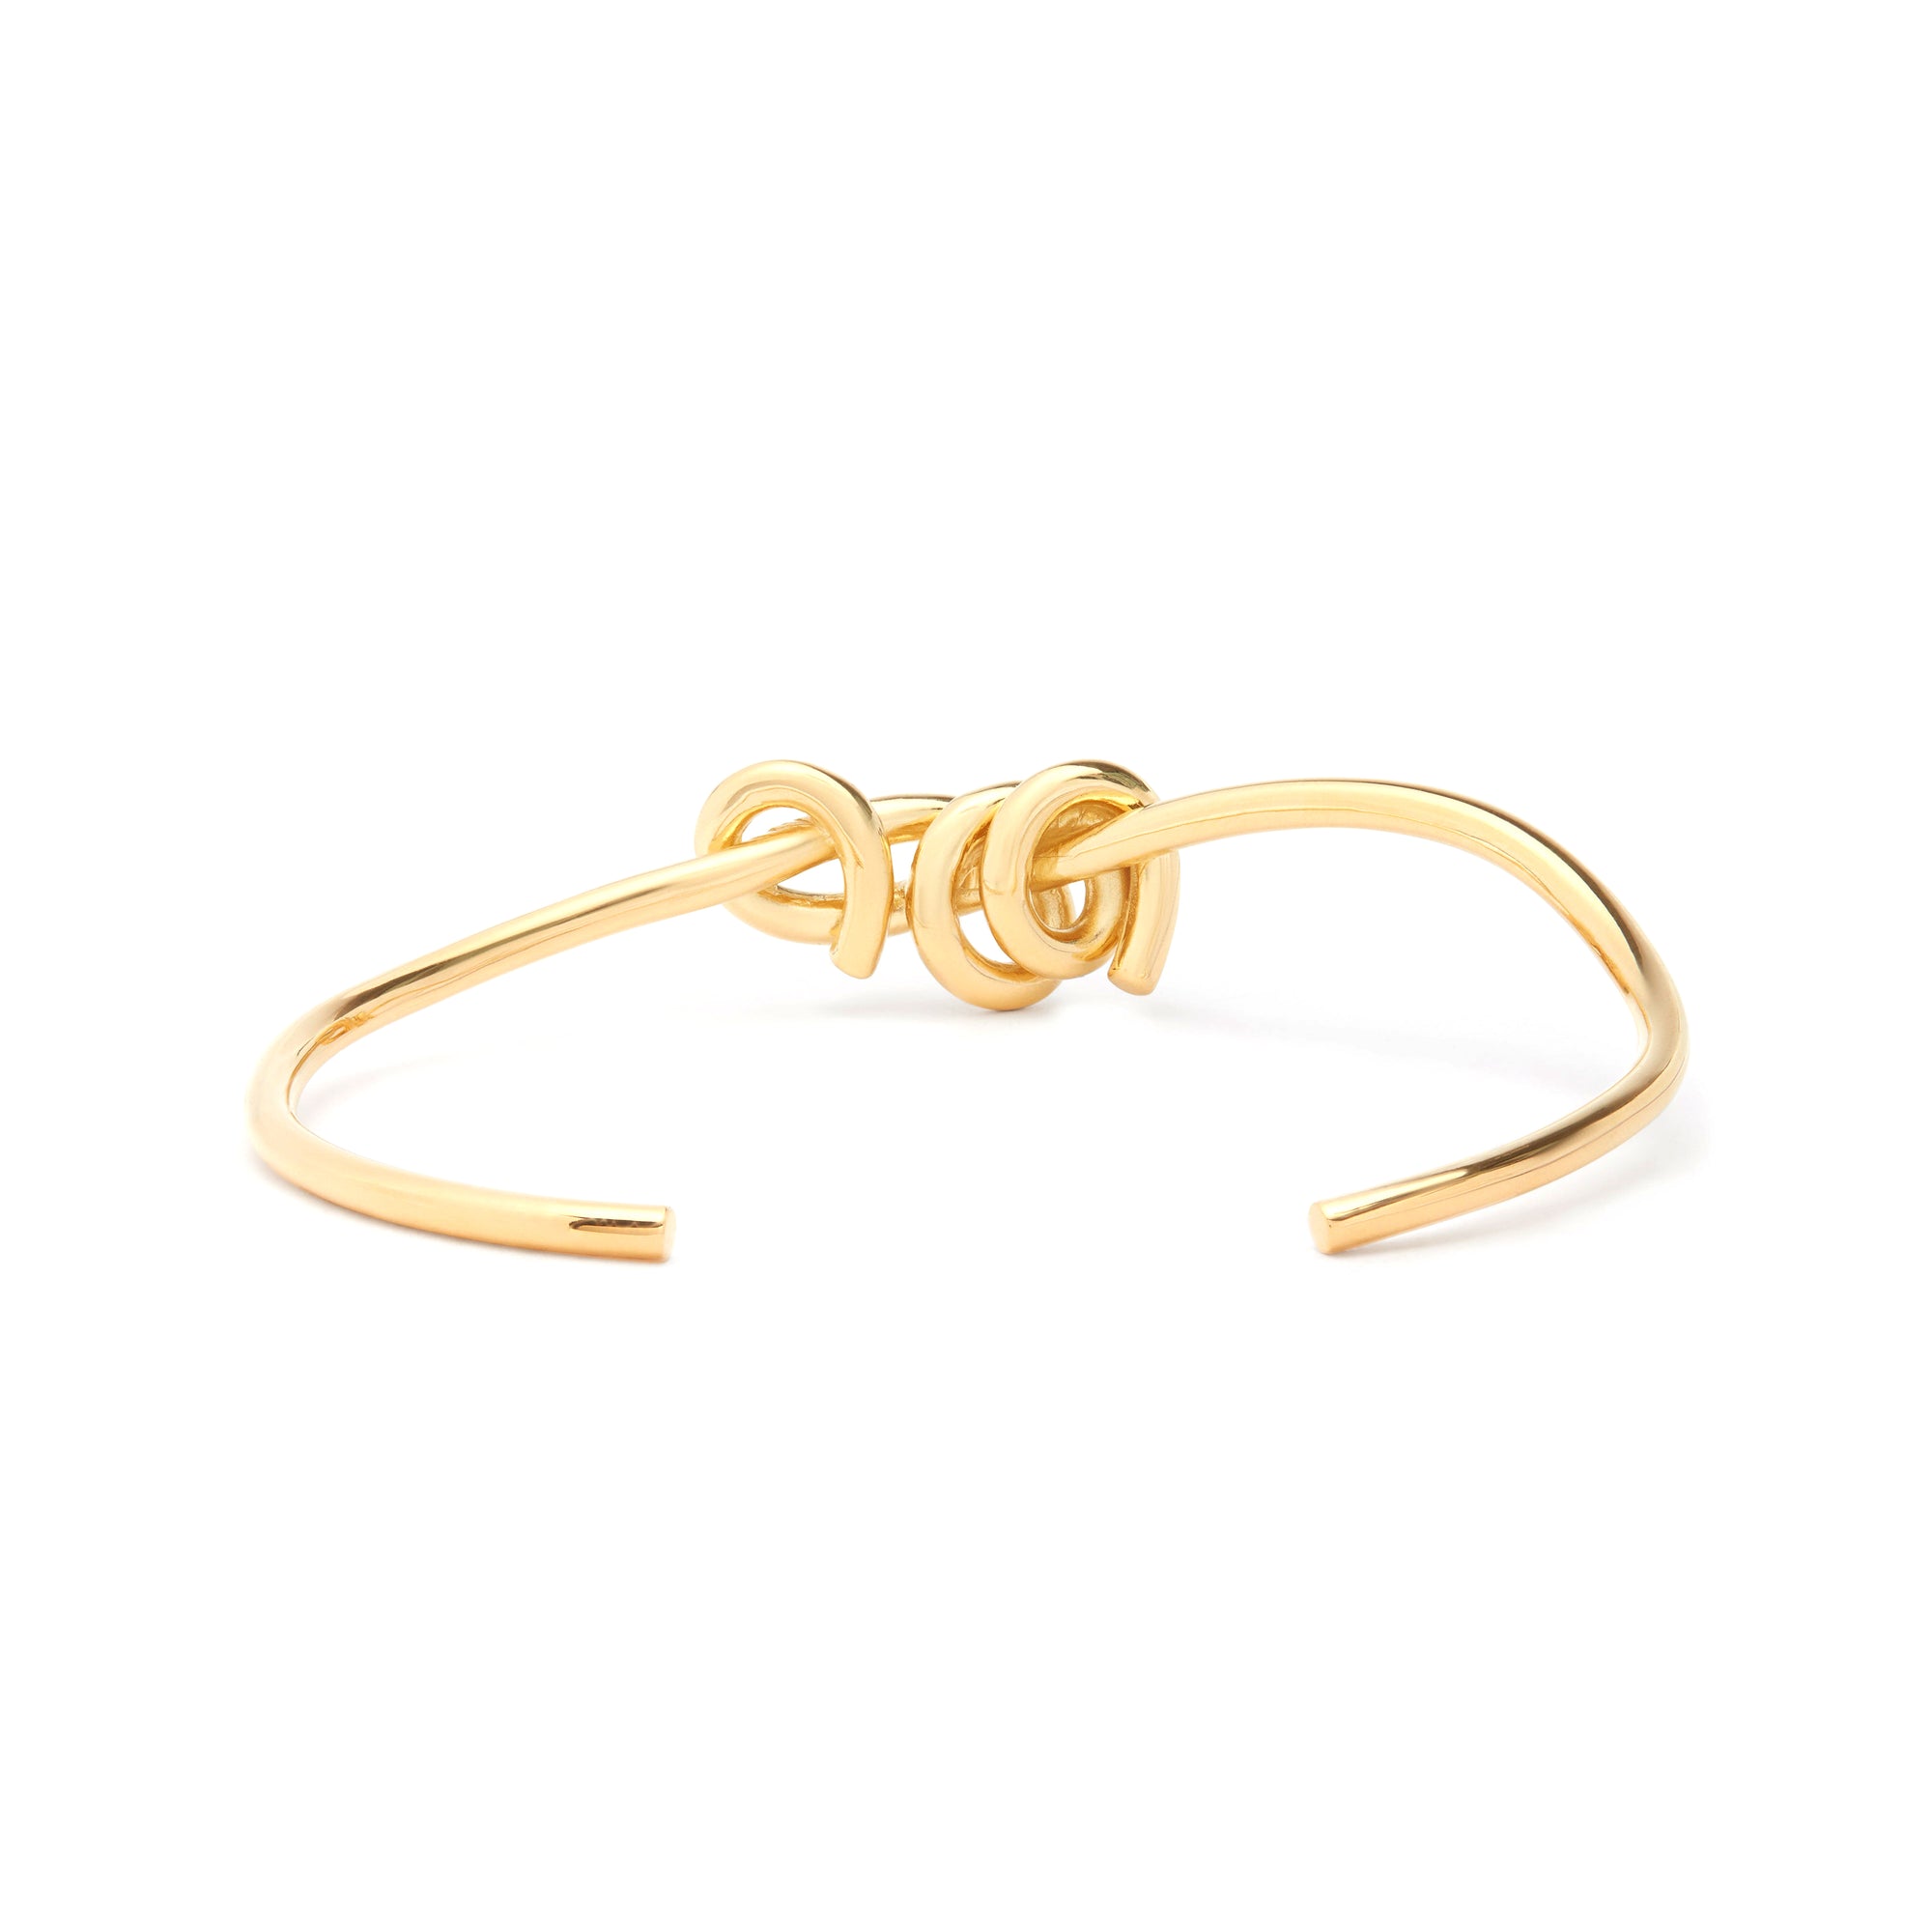 Completedworks - DSM Exclusive Knotted Bracelet - (Yellow Gold) view 2